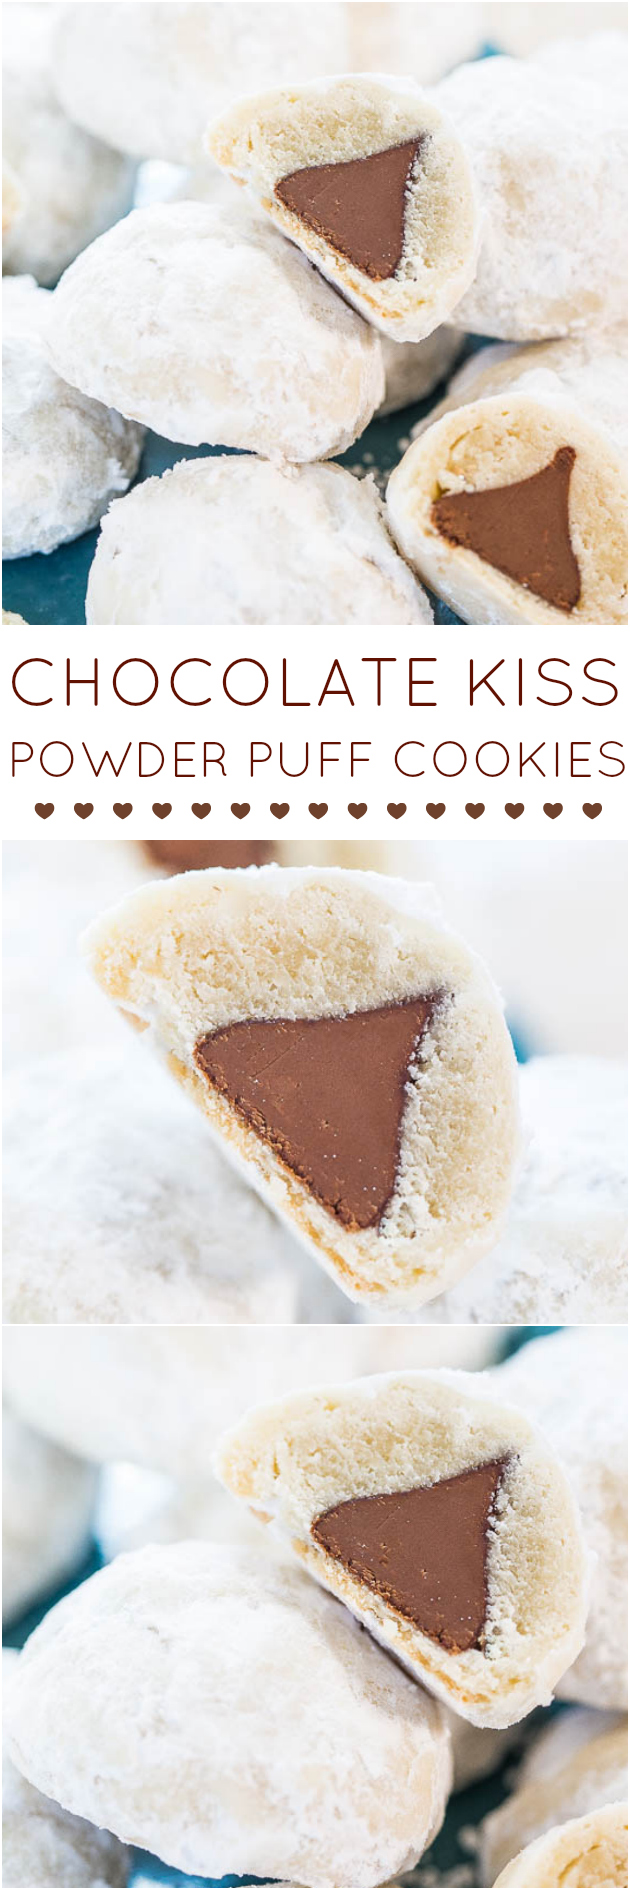 Chocolate Kiss Powder Puff Cookies - Easiest cookies ever with only 3 ingredients! The Kiss in the middle makes everyone smile!! So fun!!